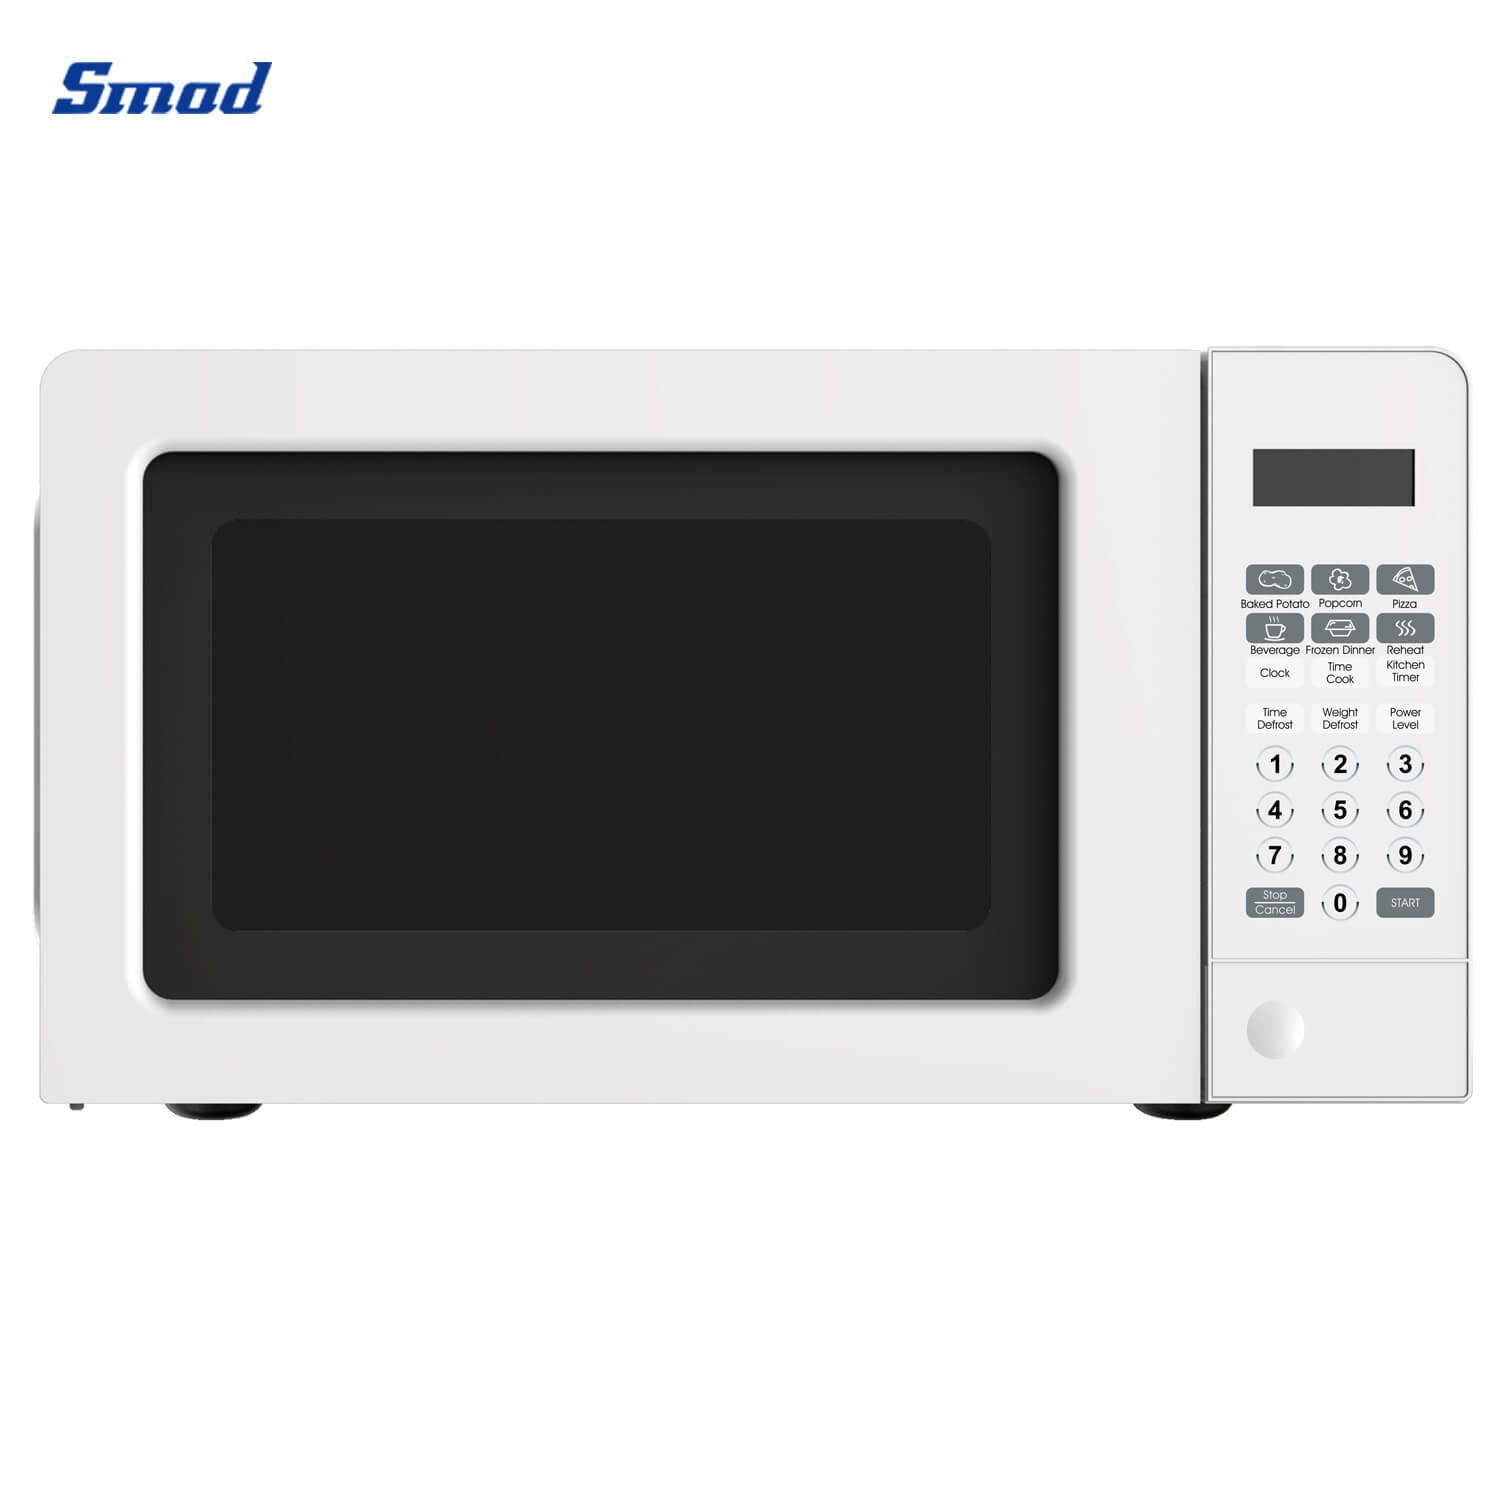 Smad Digital Microwave Oven with Grill